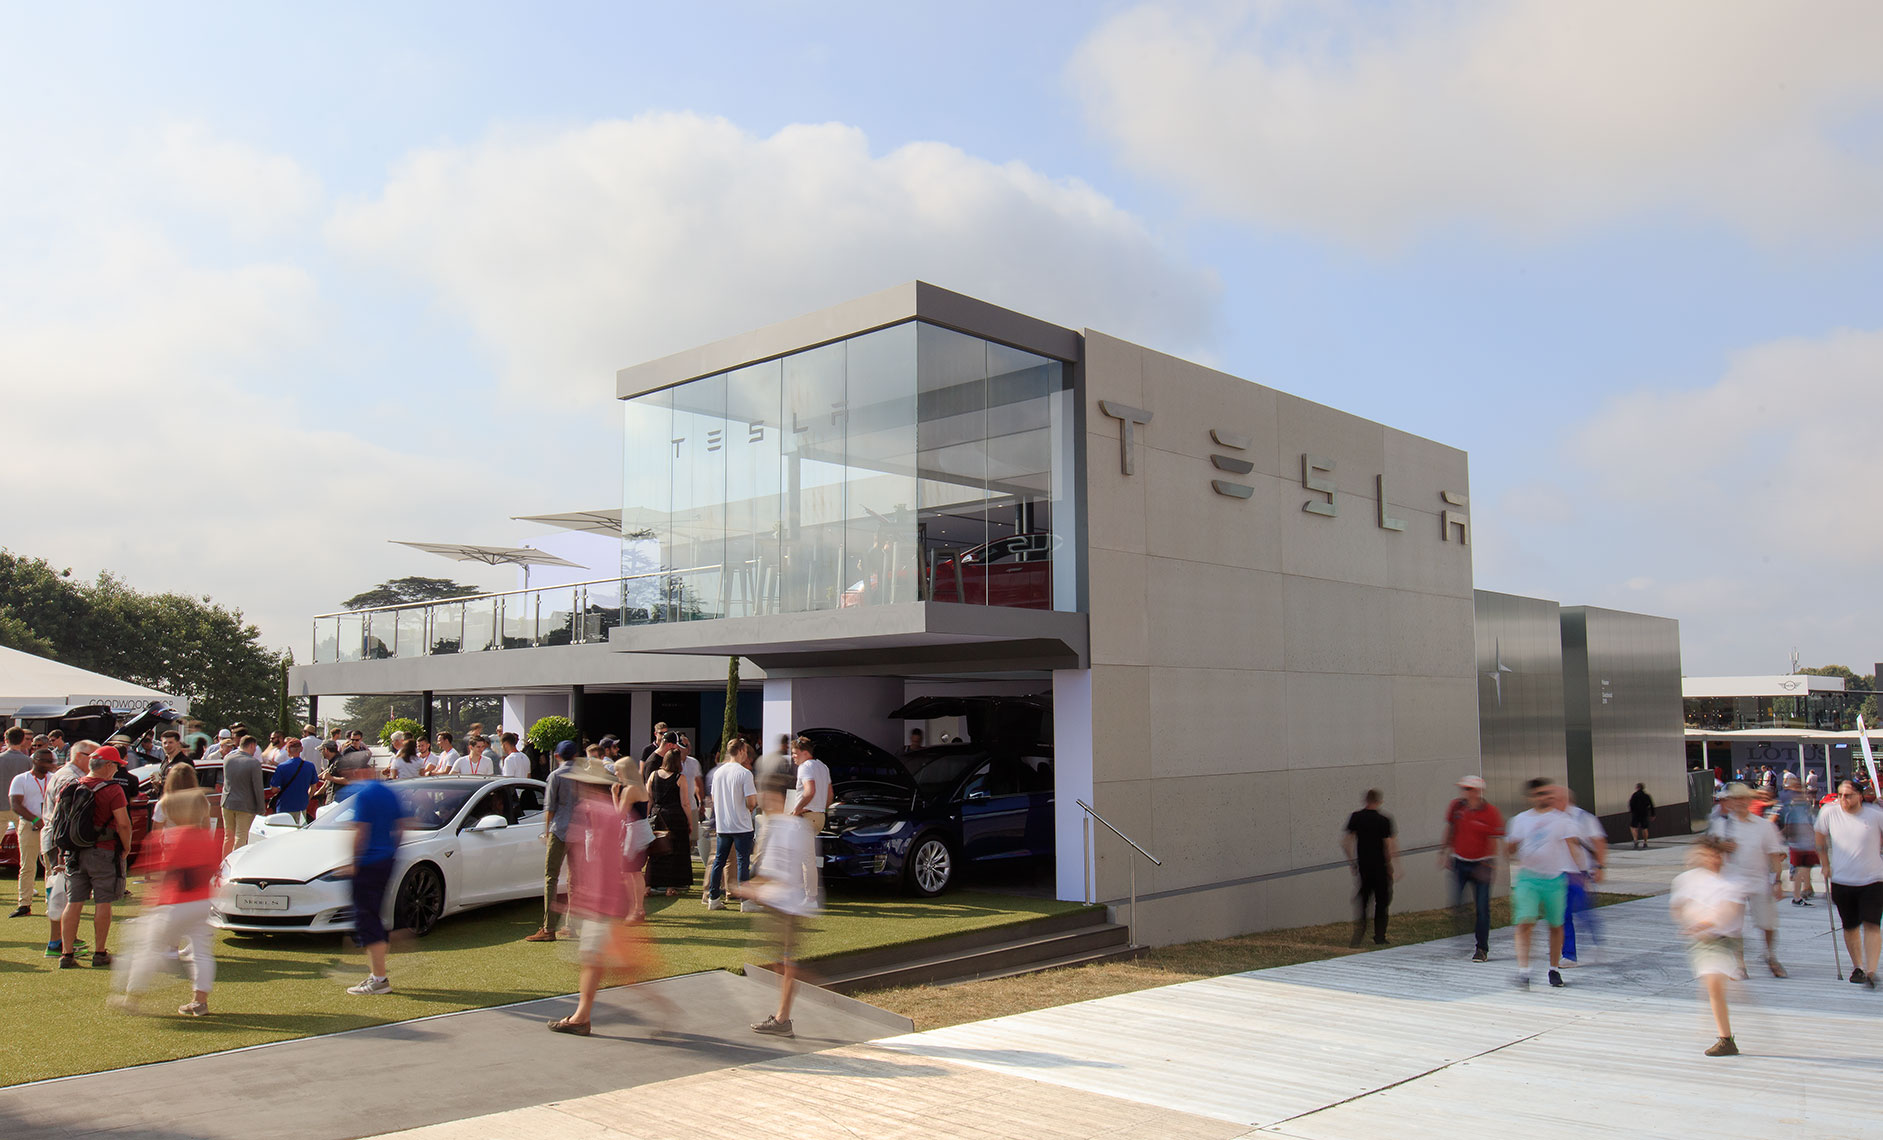 Tesla exhibition storefront being visited by customers at outdoor auto festival